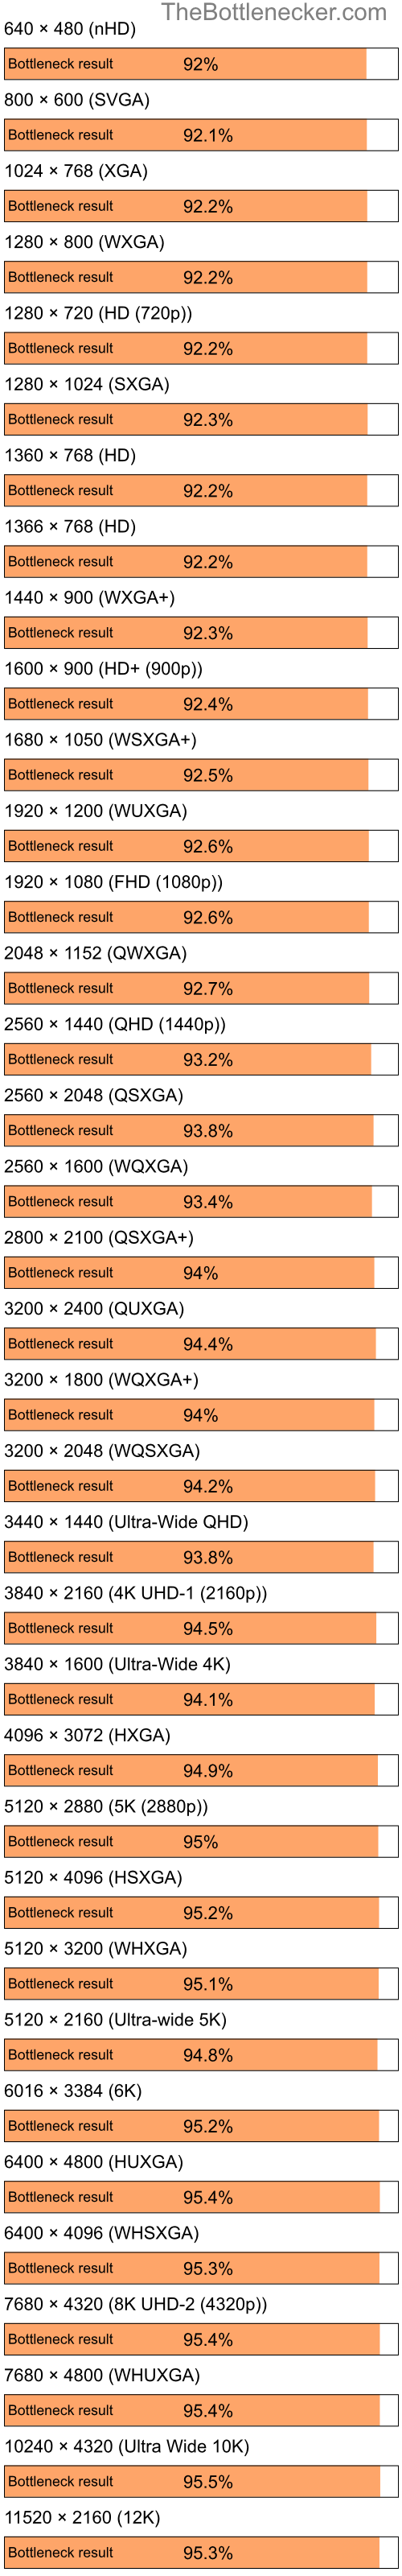 Bottleneck results by resolution for Intel Atom Z520 and AMD Mobility Radeon 9000 in Graphic Card Intense Tasks